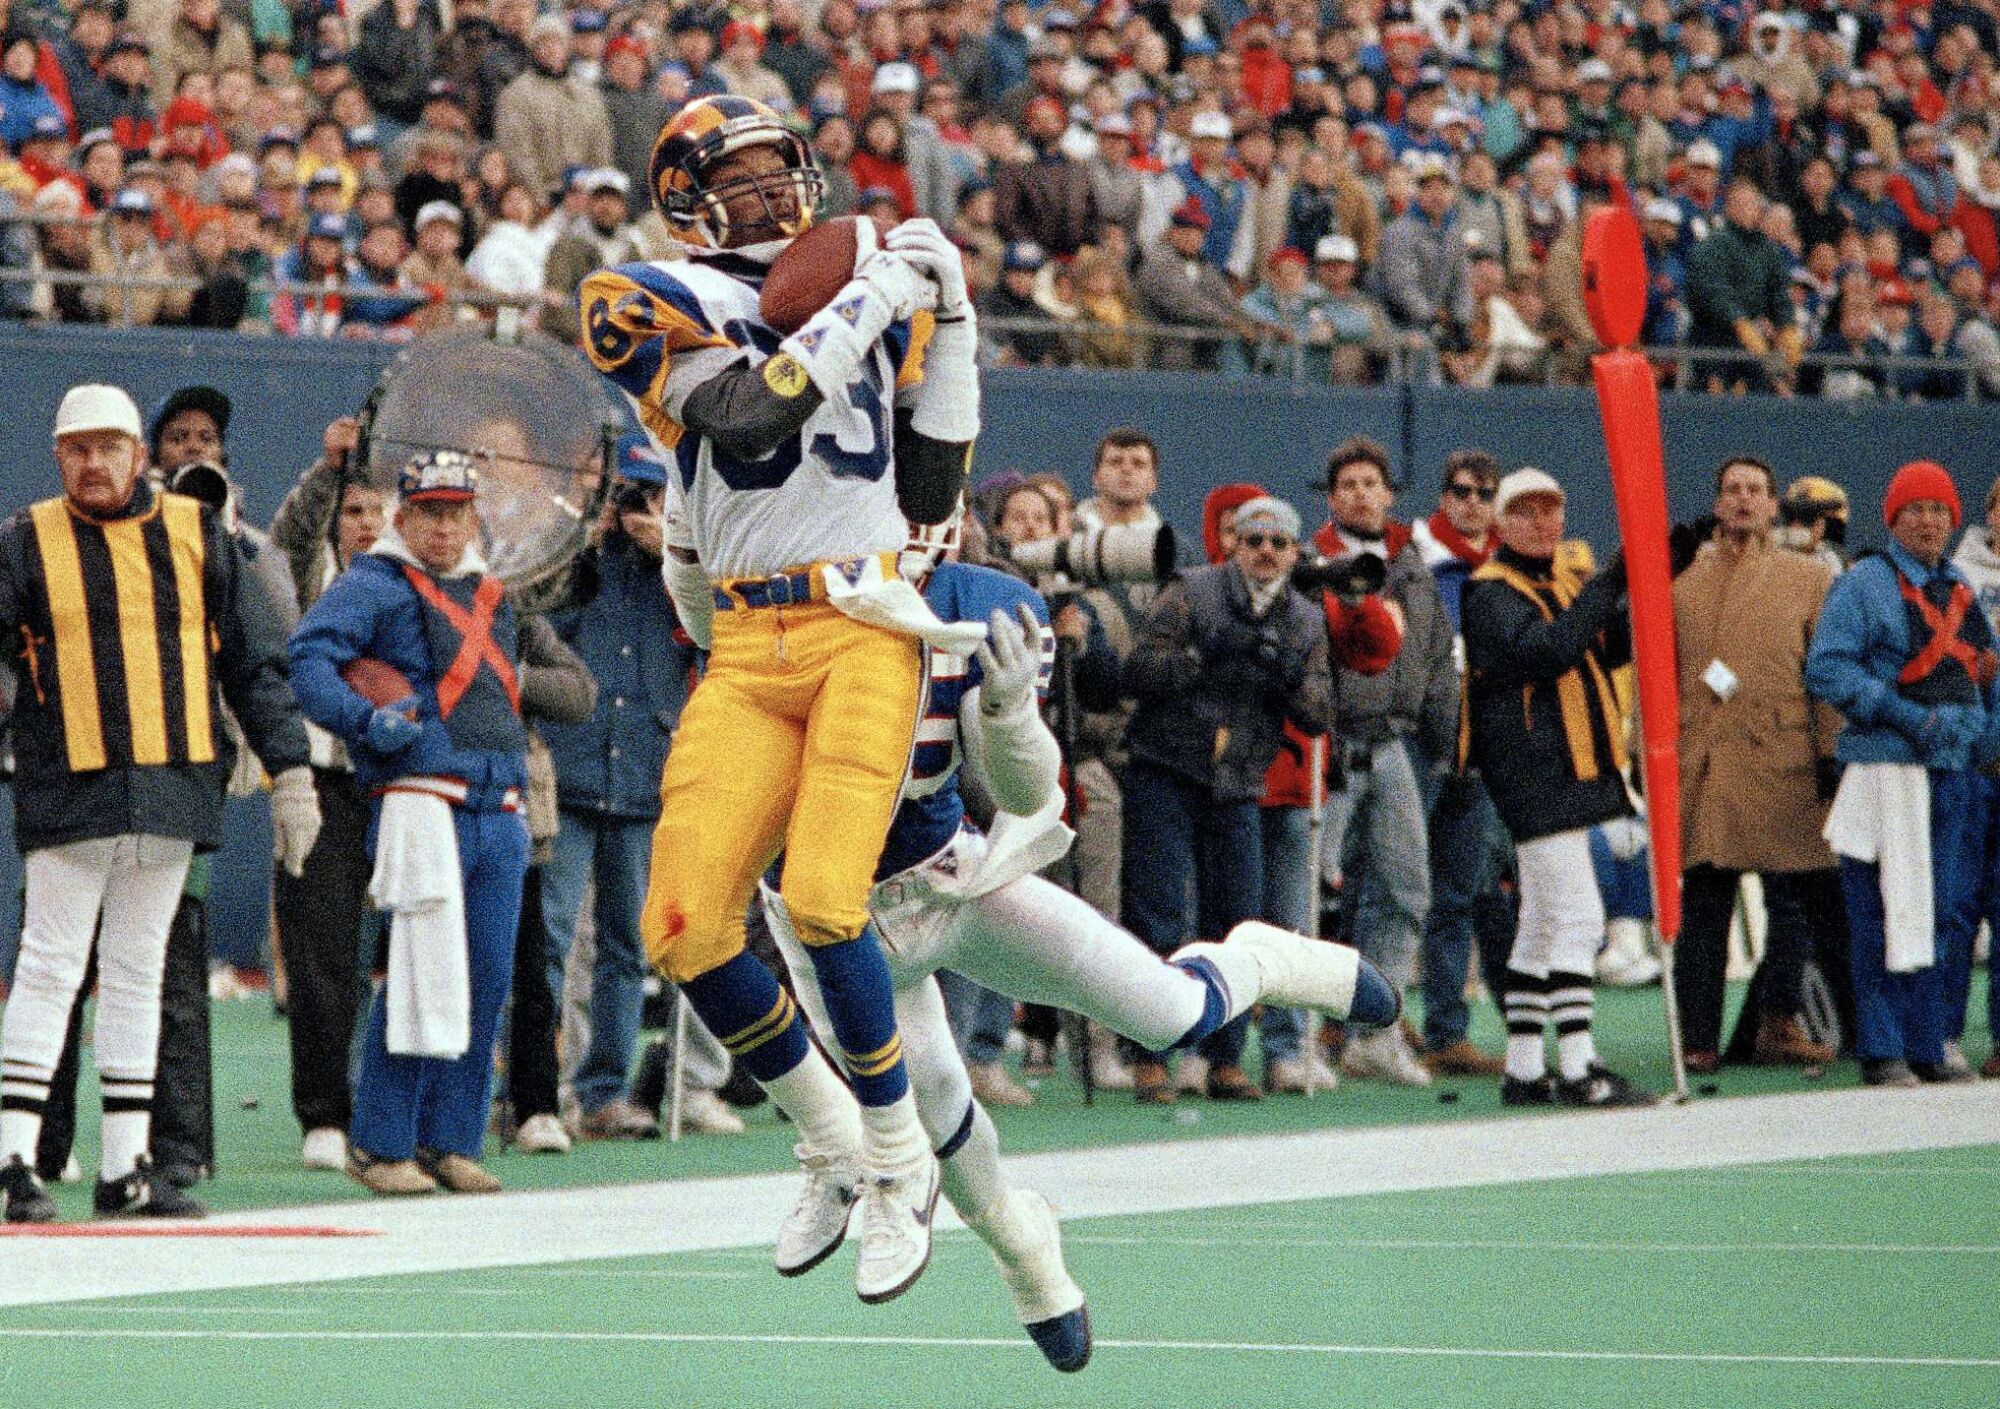 Los Angeles Rams Willie Anderson takes the ball into the end zone for the winning touchdown against the Giants, Jan. 7, 1990